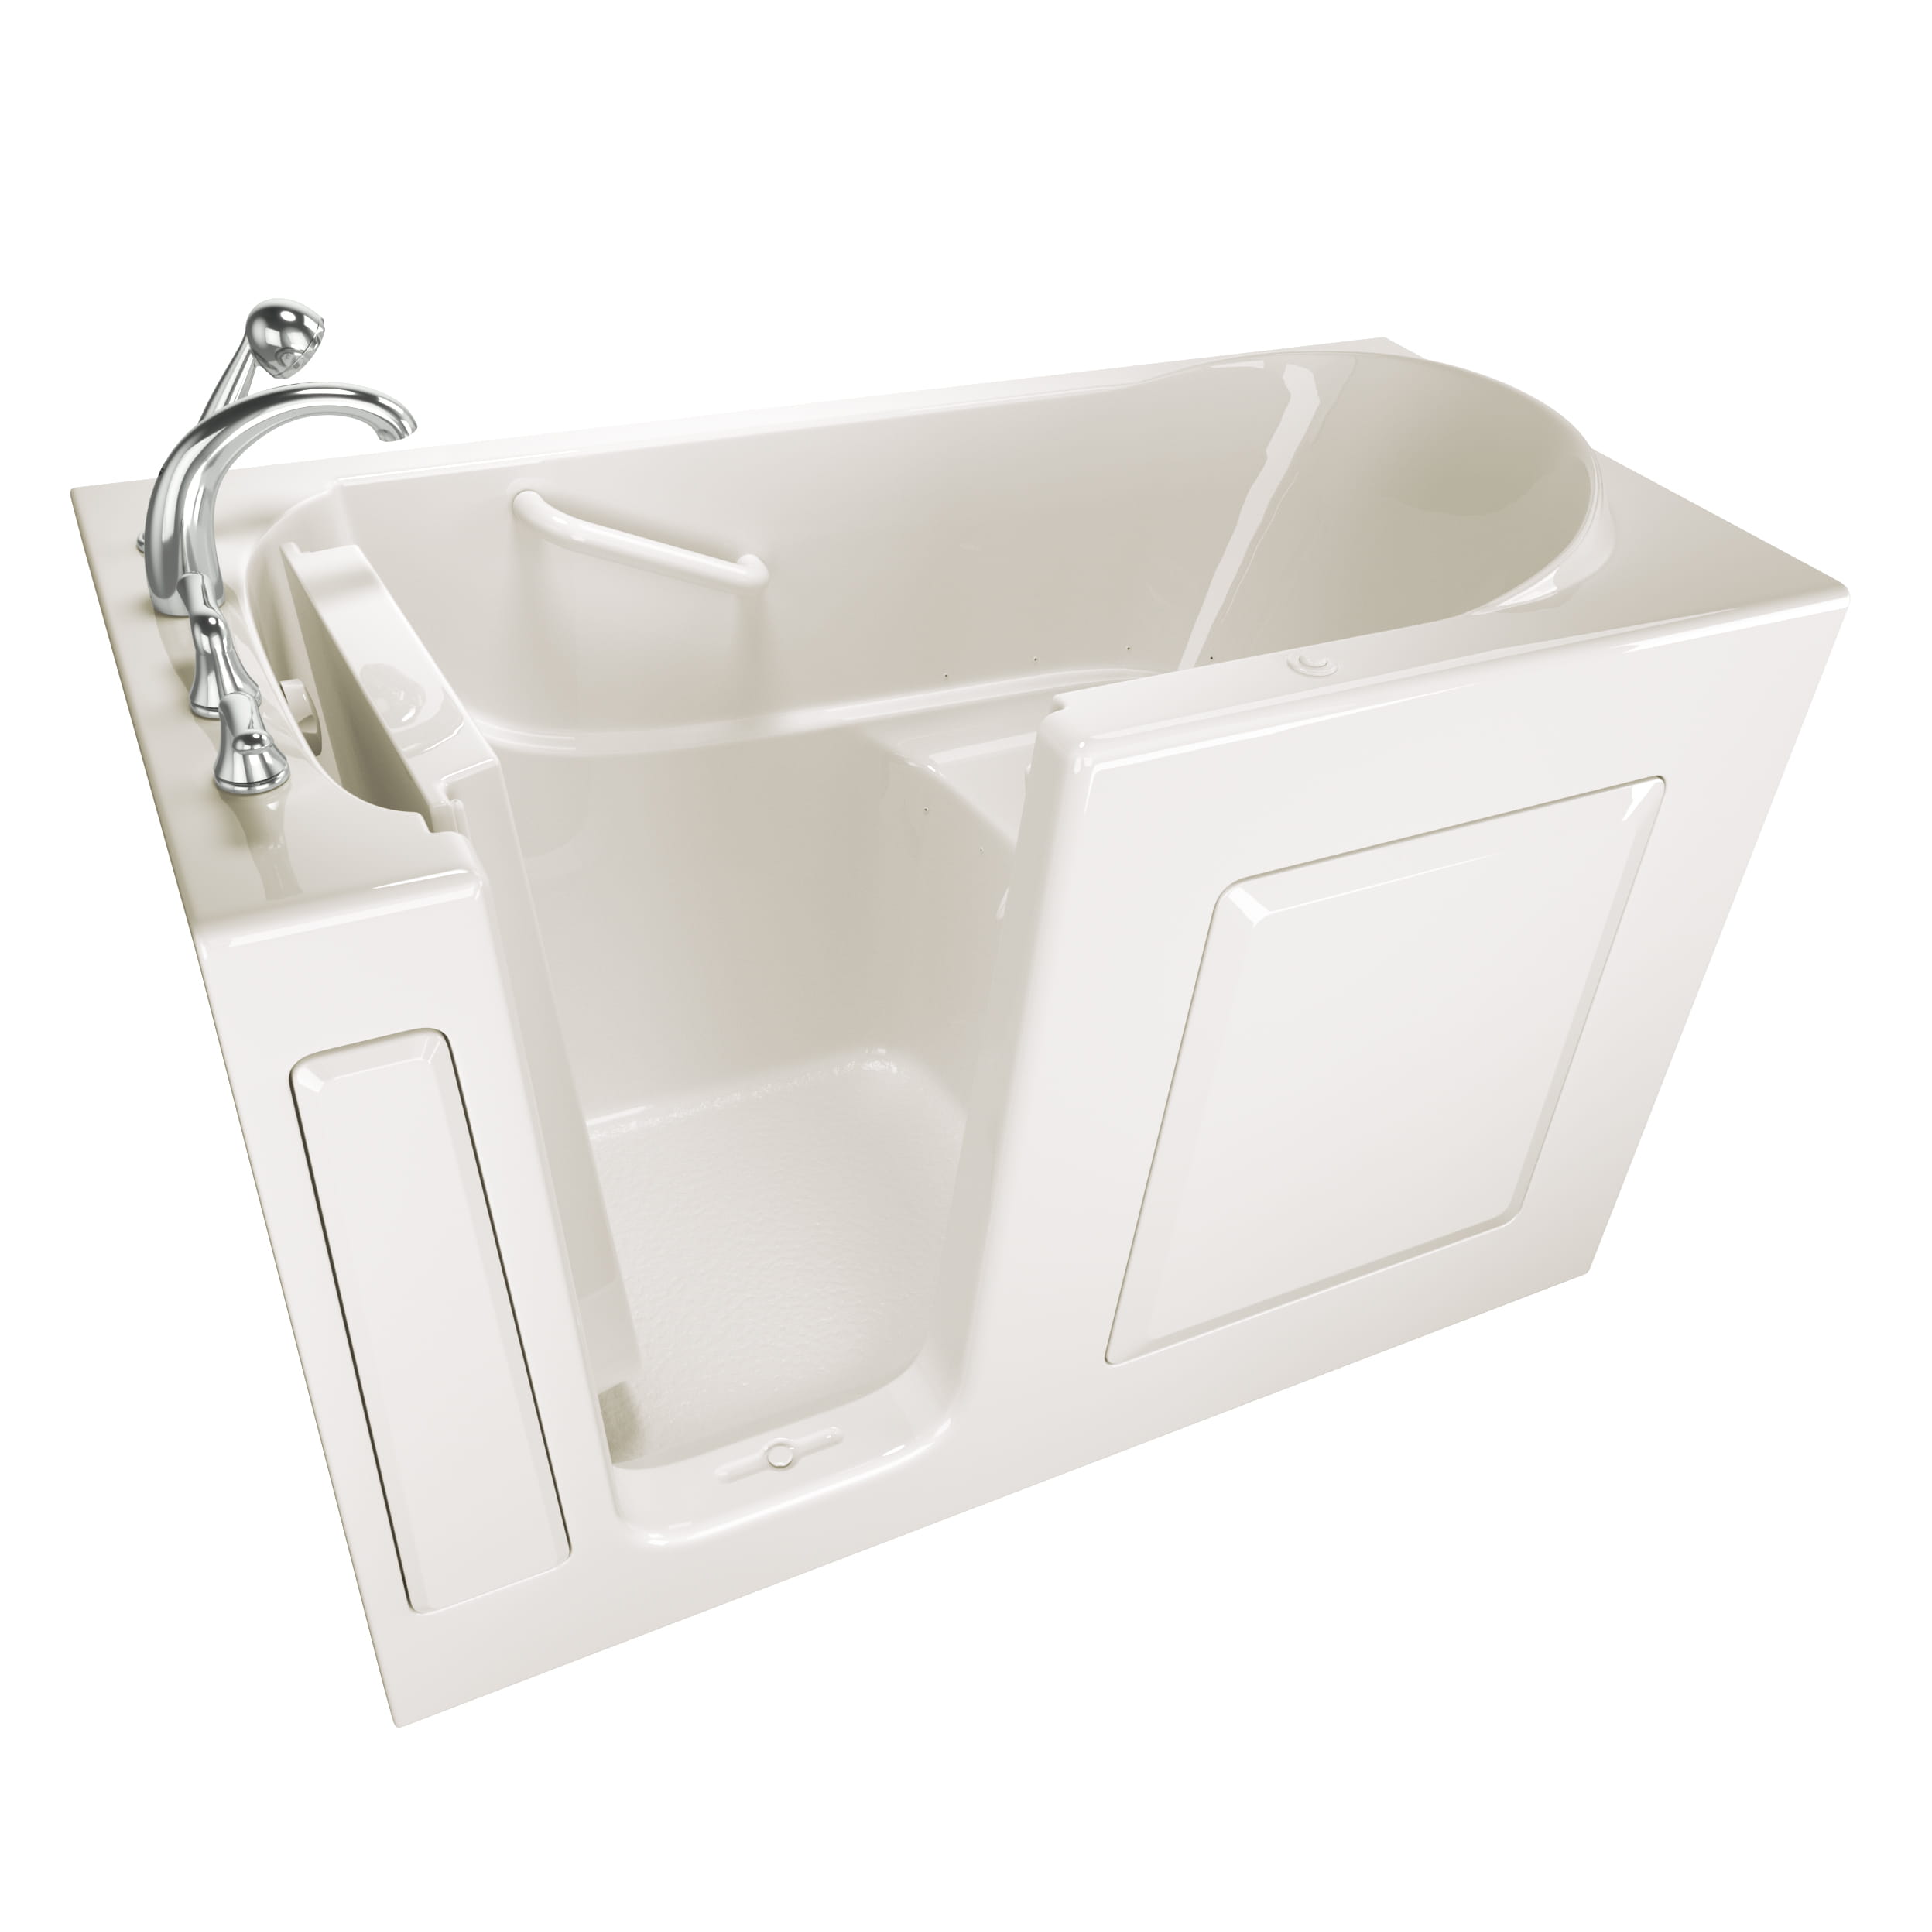 Gelcoat Entry Series 60 x 30 Inch Walk In Tub With Air Spa System - Left Hand Drain With Faucet ST BISCUIT